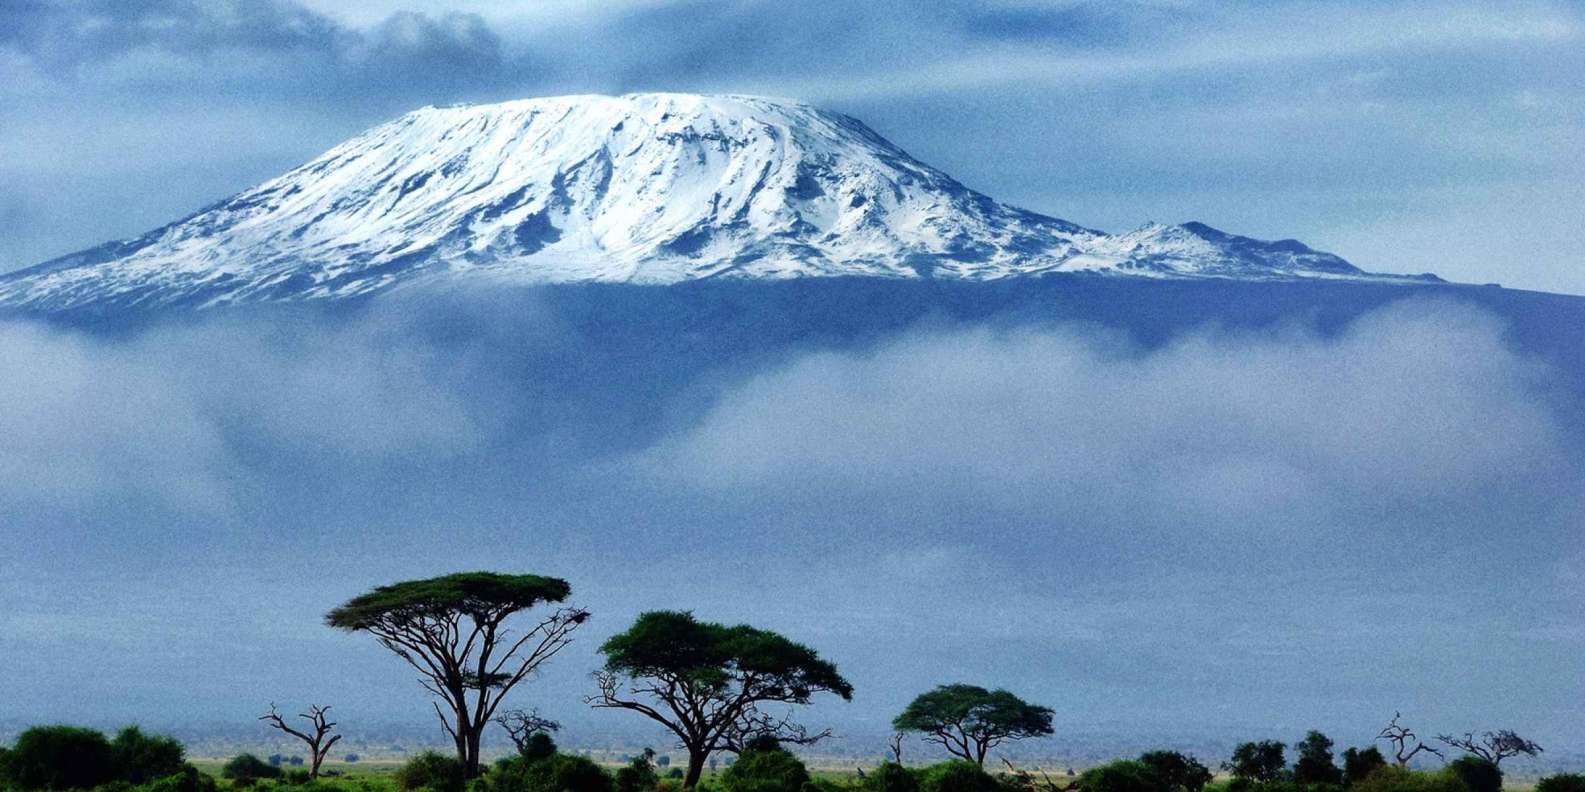 Image Slider No: 2 When is The Best Time to Climb Mt Kilimanjaro? 